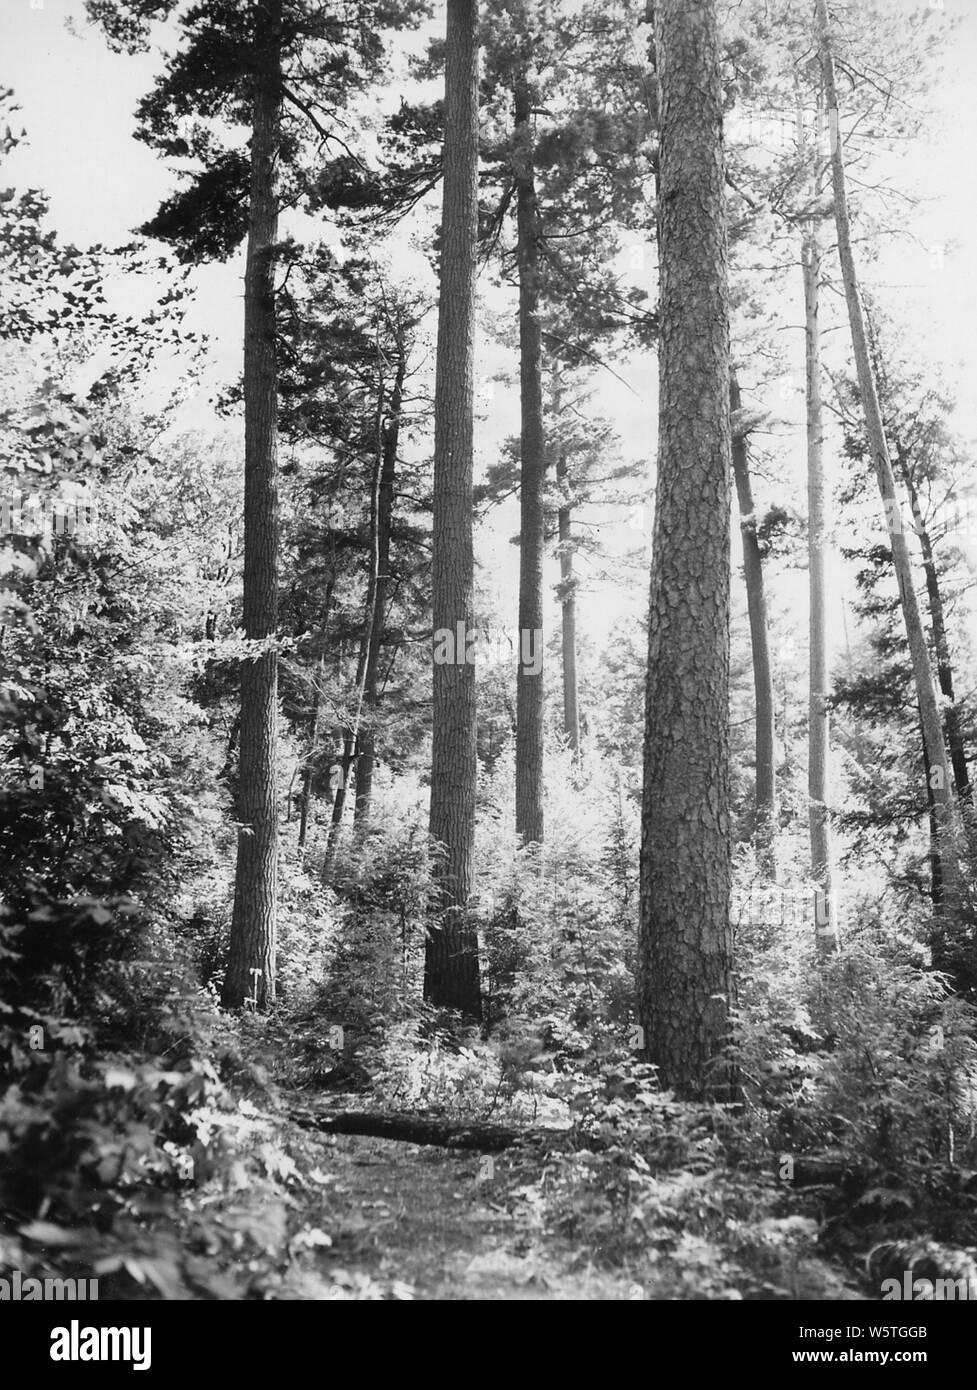 Photograph of Connor Lumber and Land Company Near Nicolet National Forest; Scope and content:  Original caption: Connor Lumber and Land Company, Wis. Near Nicolet NF. Four miles south of Laona. Tree with ax-white pine. Big tree in middle-white pine. Stock Photo